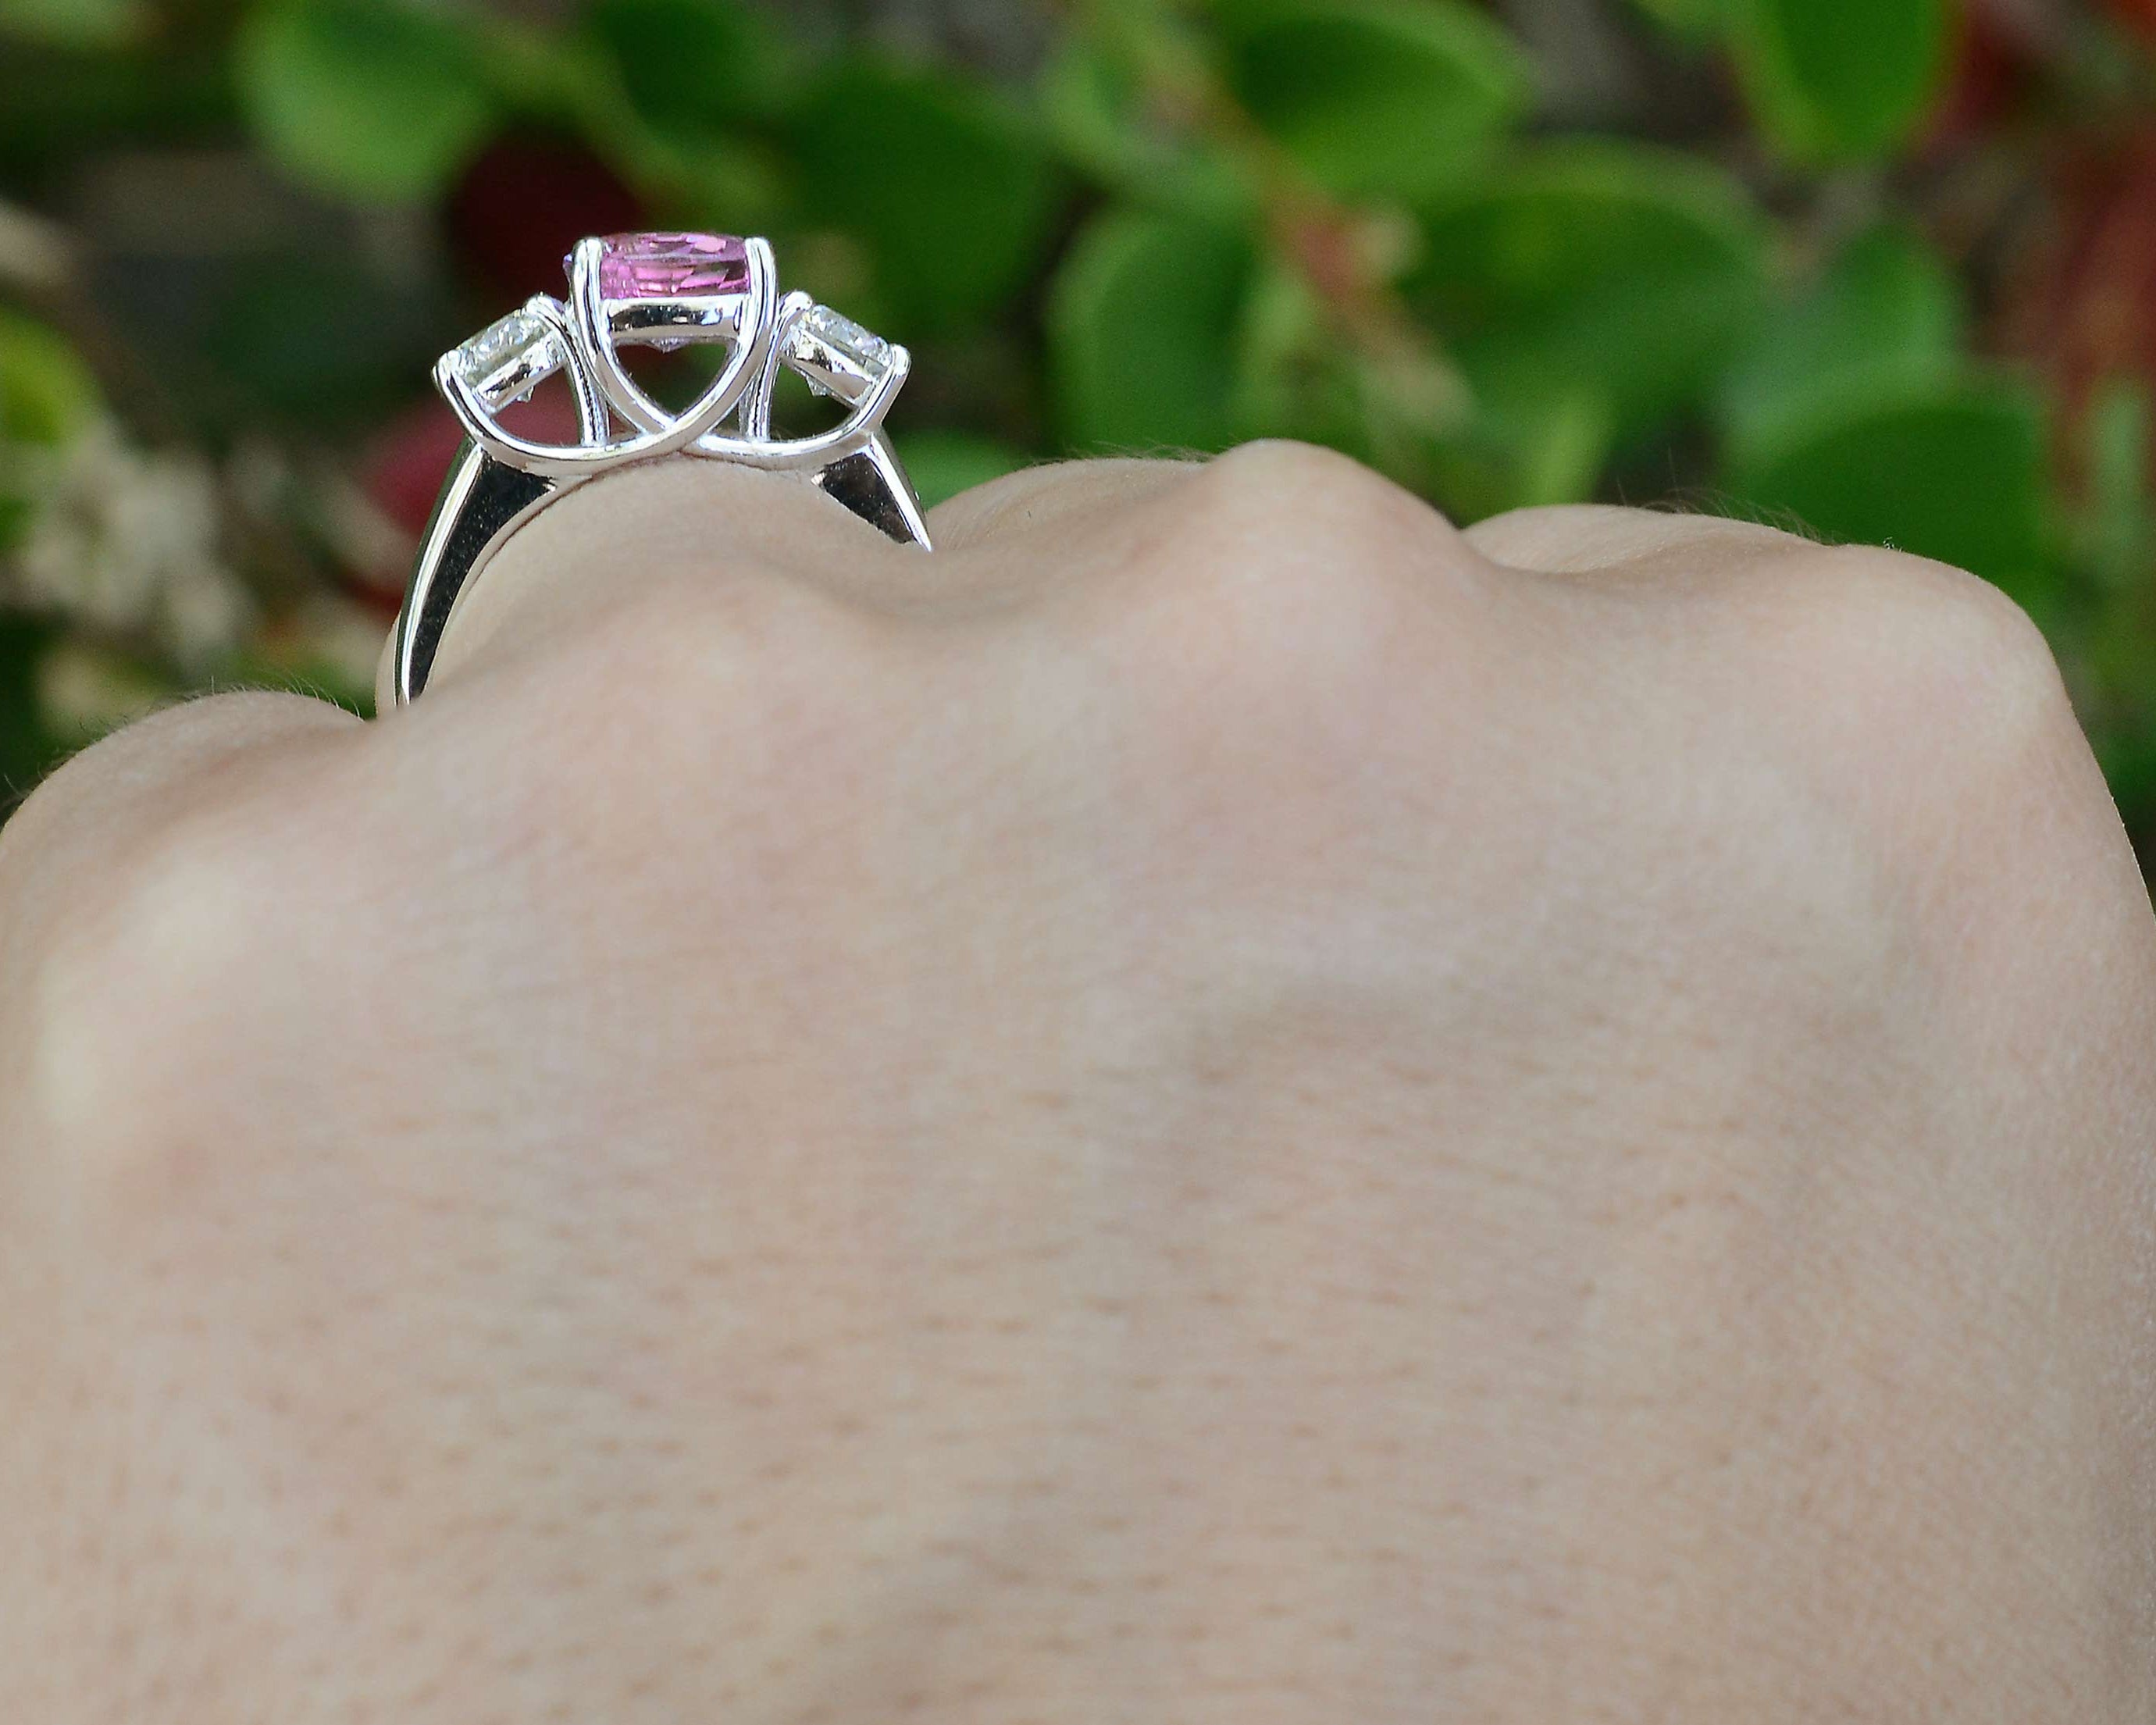 This setting is styled after the Tiffany Lucida ring, with an interesting twist.